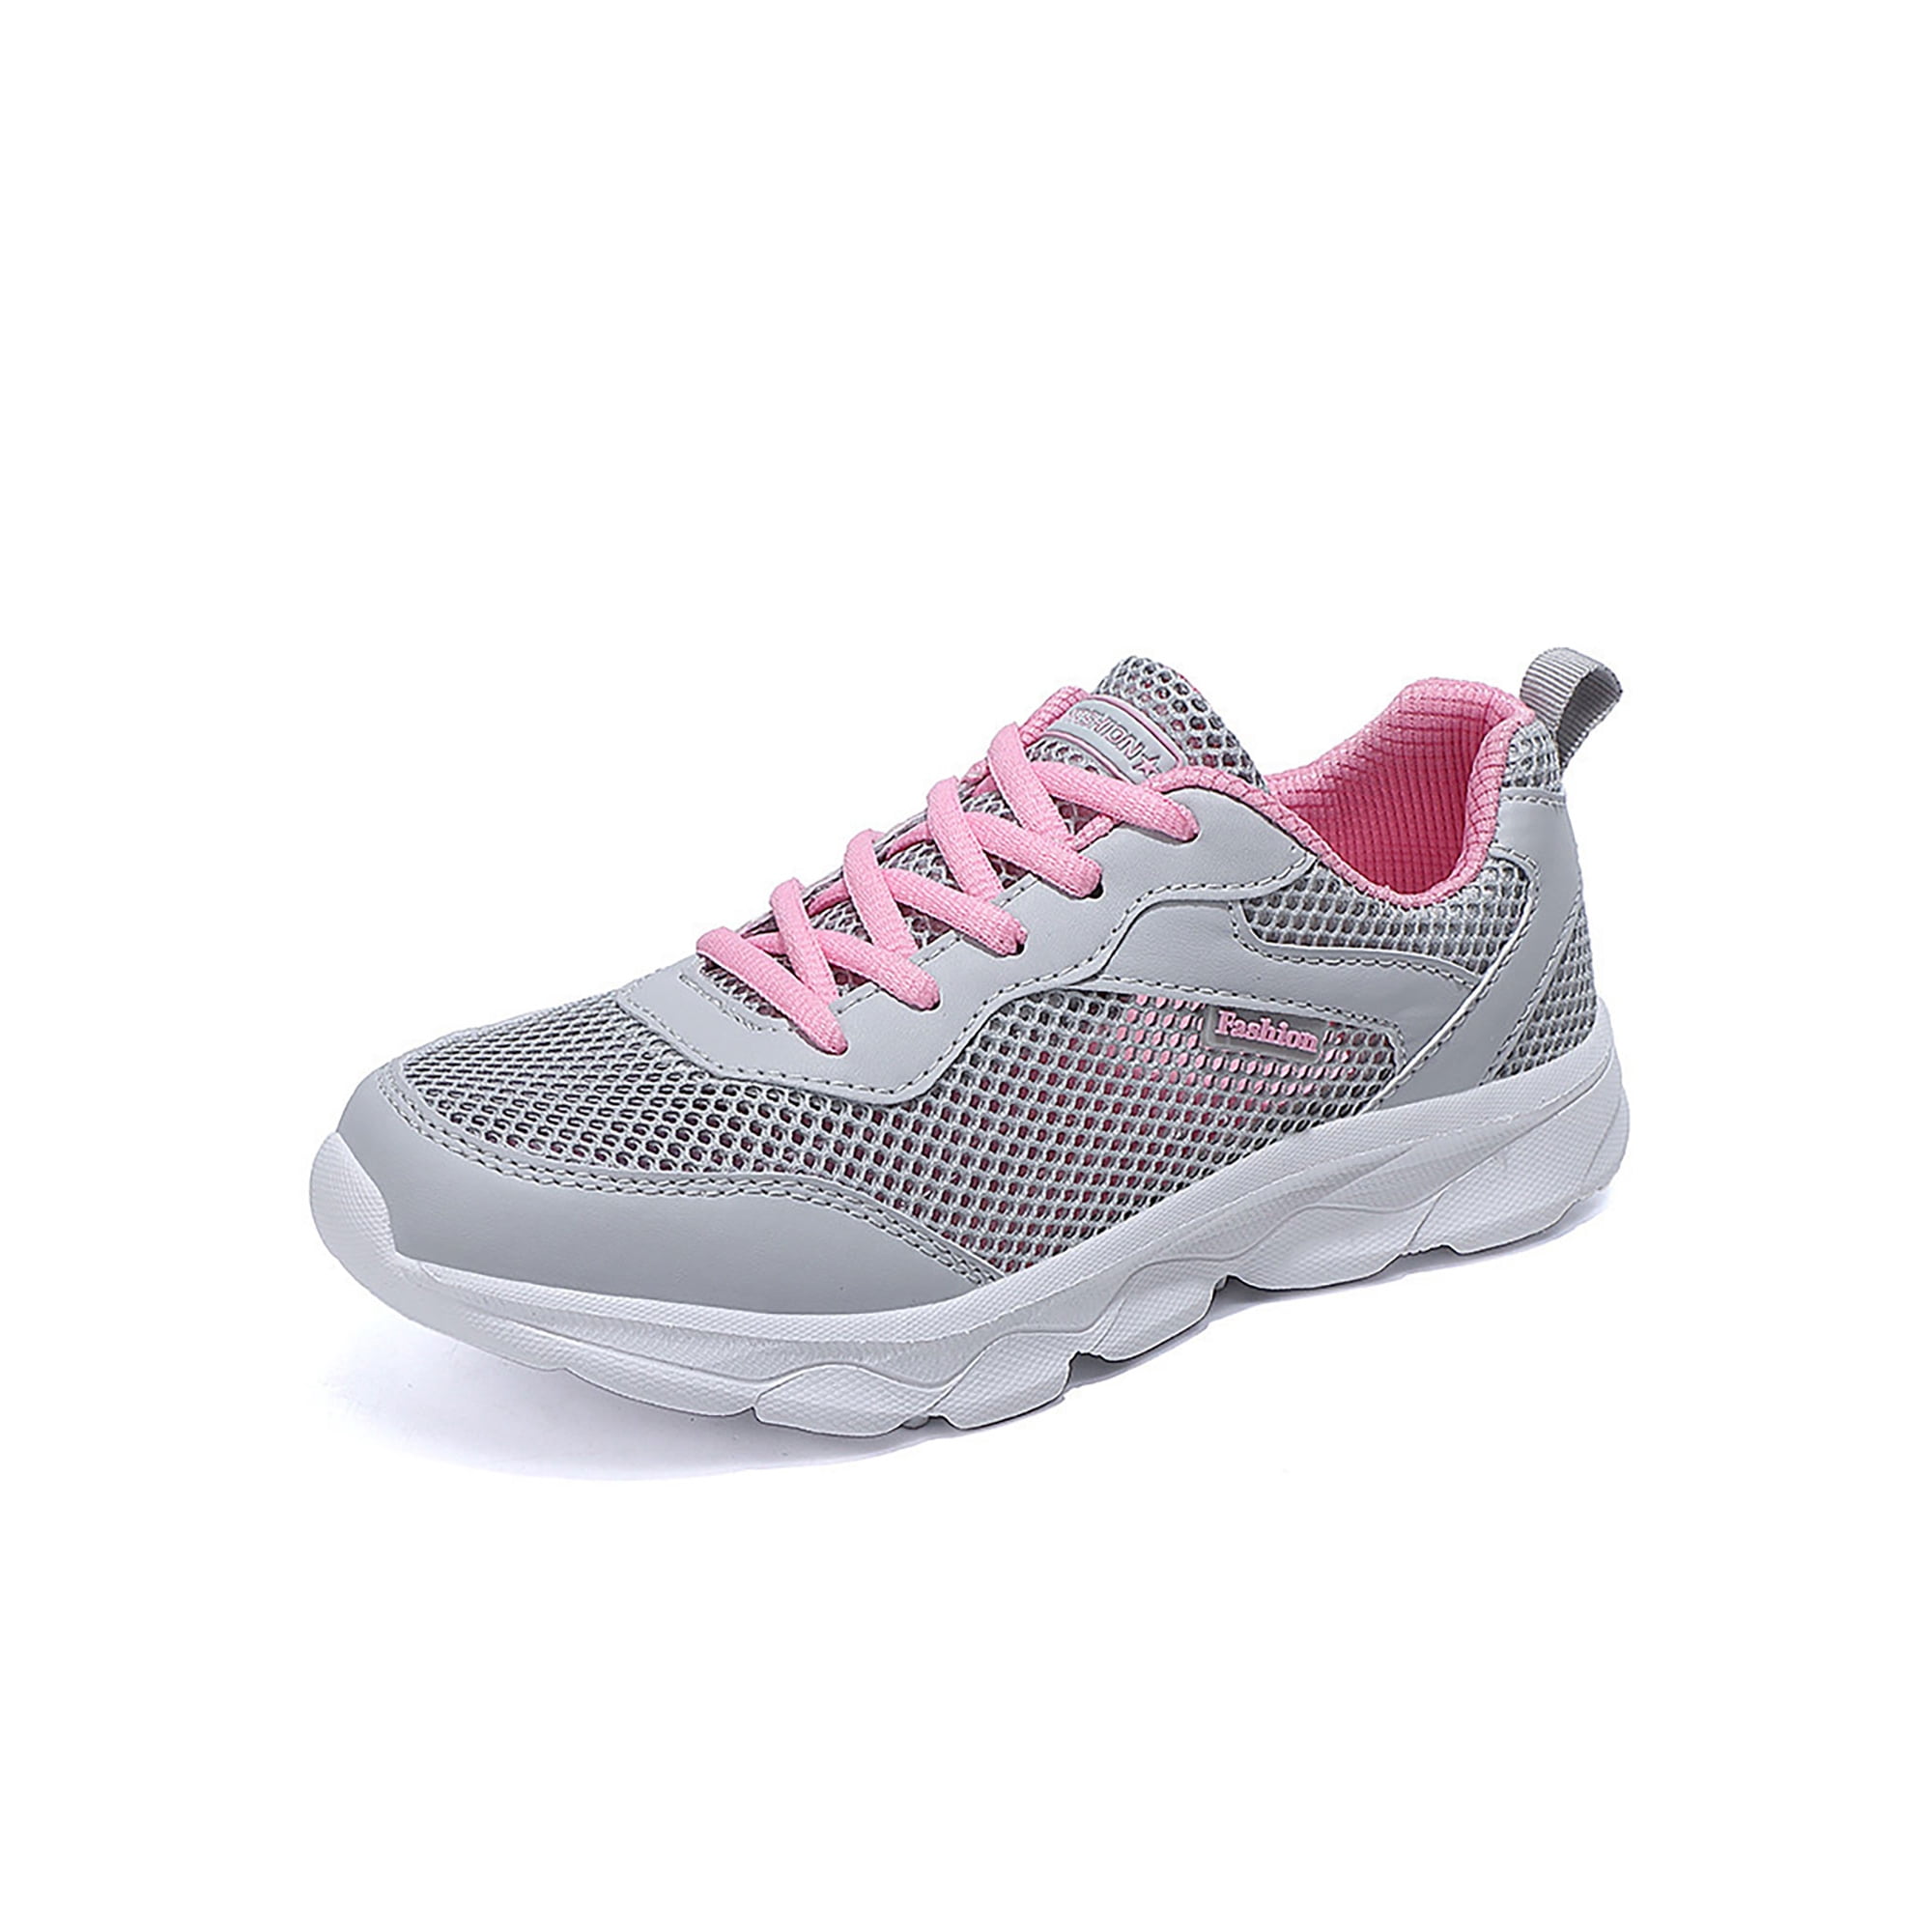 Wazshop Women Sneakers Lace Up Flats Hollow Out Athletic Shoes Non-Slip  Mesh Sport Sneaker Ladies Walking Shoe Low Top Lightweight Gray Pink 5.5 